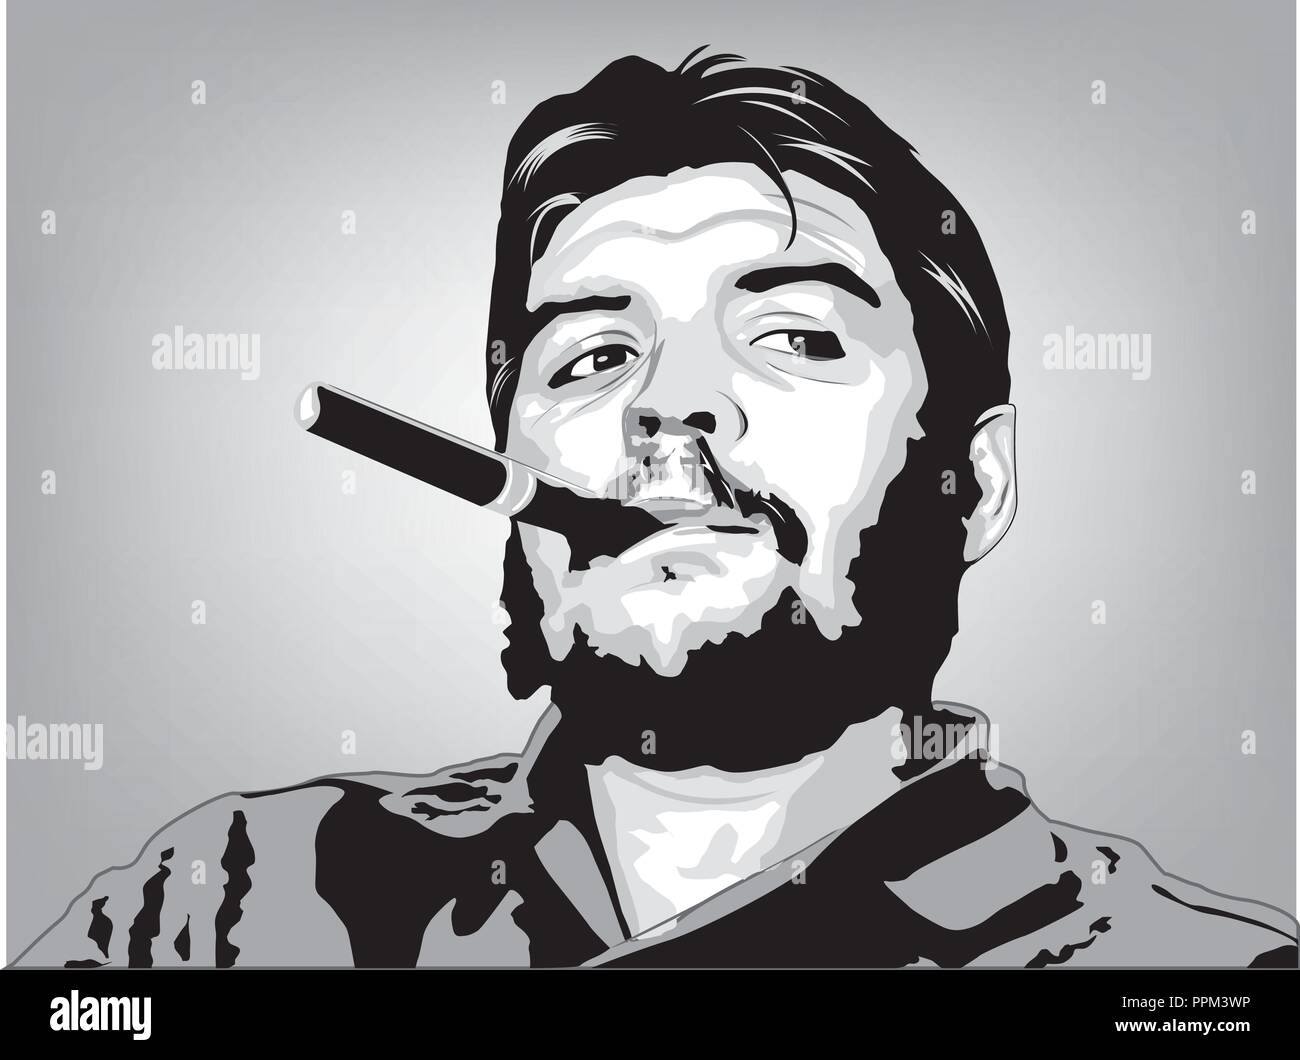 Che guevara Stock Vector Images - Alamy